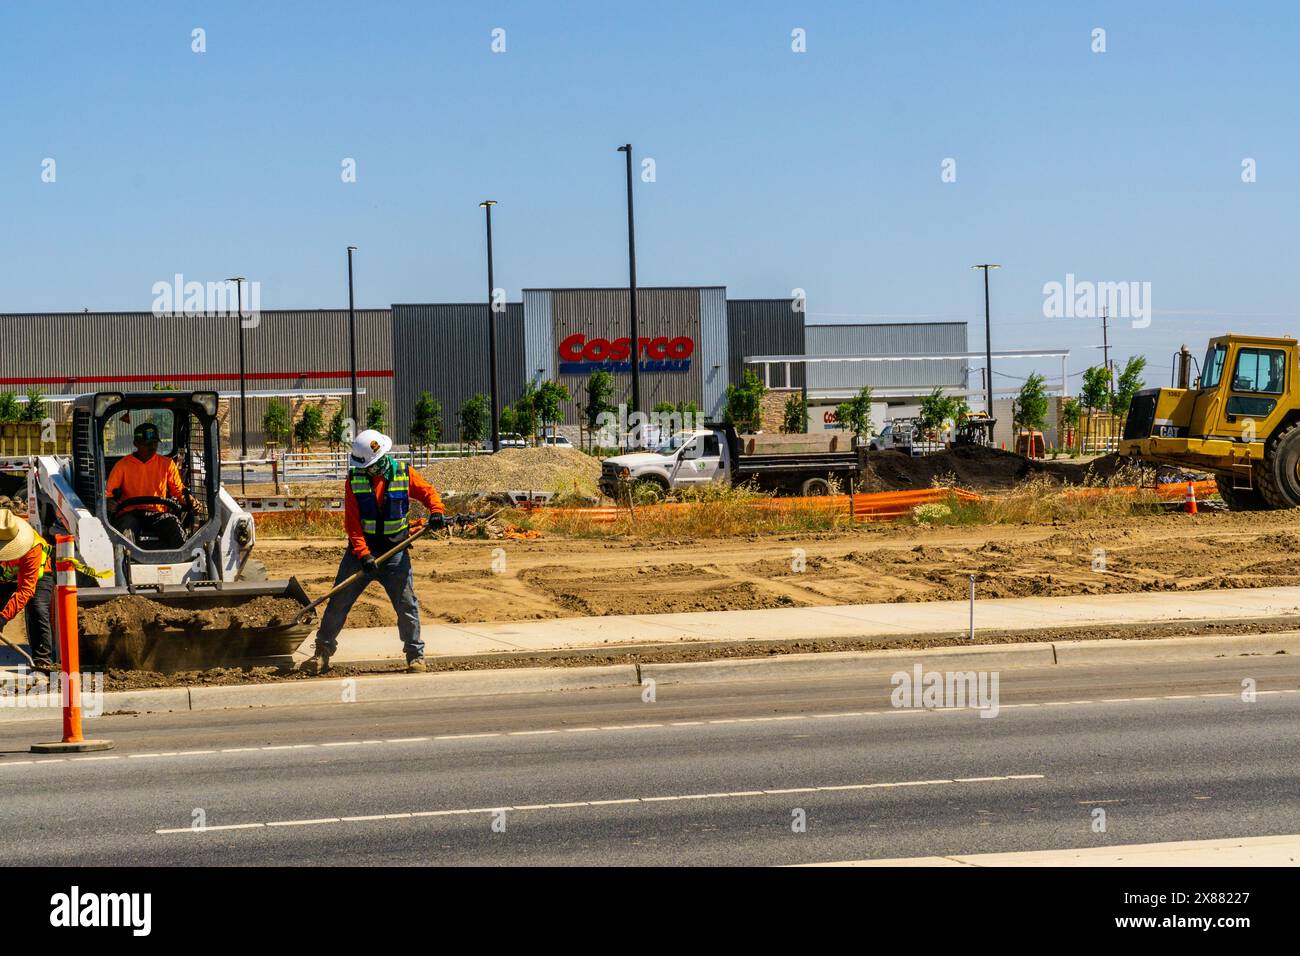 A new Costco Wholesale warehouse store under construction in Riverbank California Stanislaus County USA Stock Photo